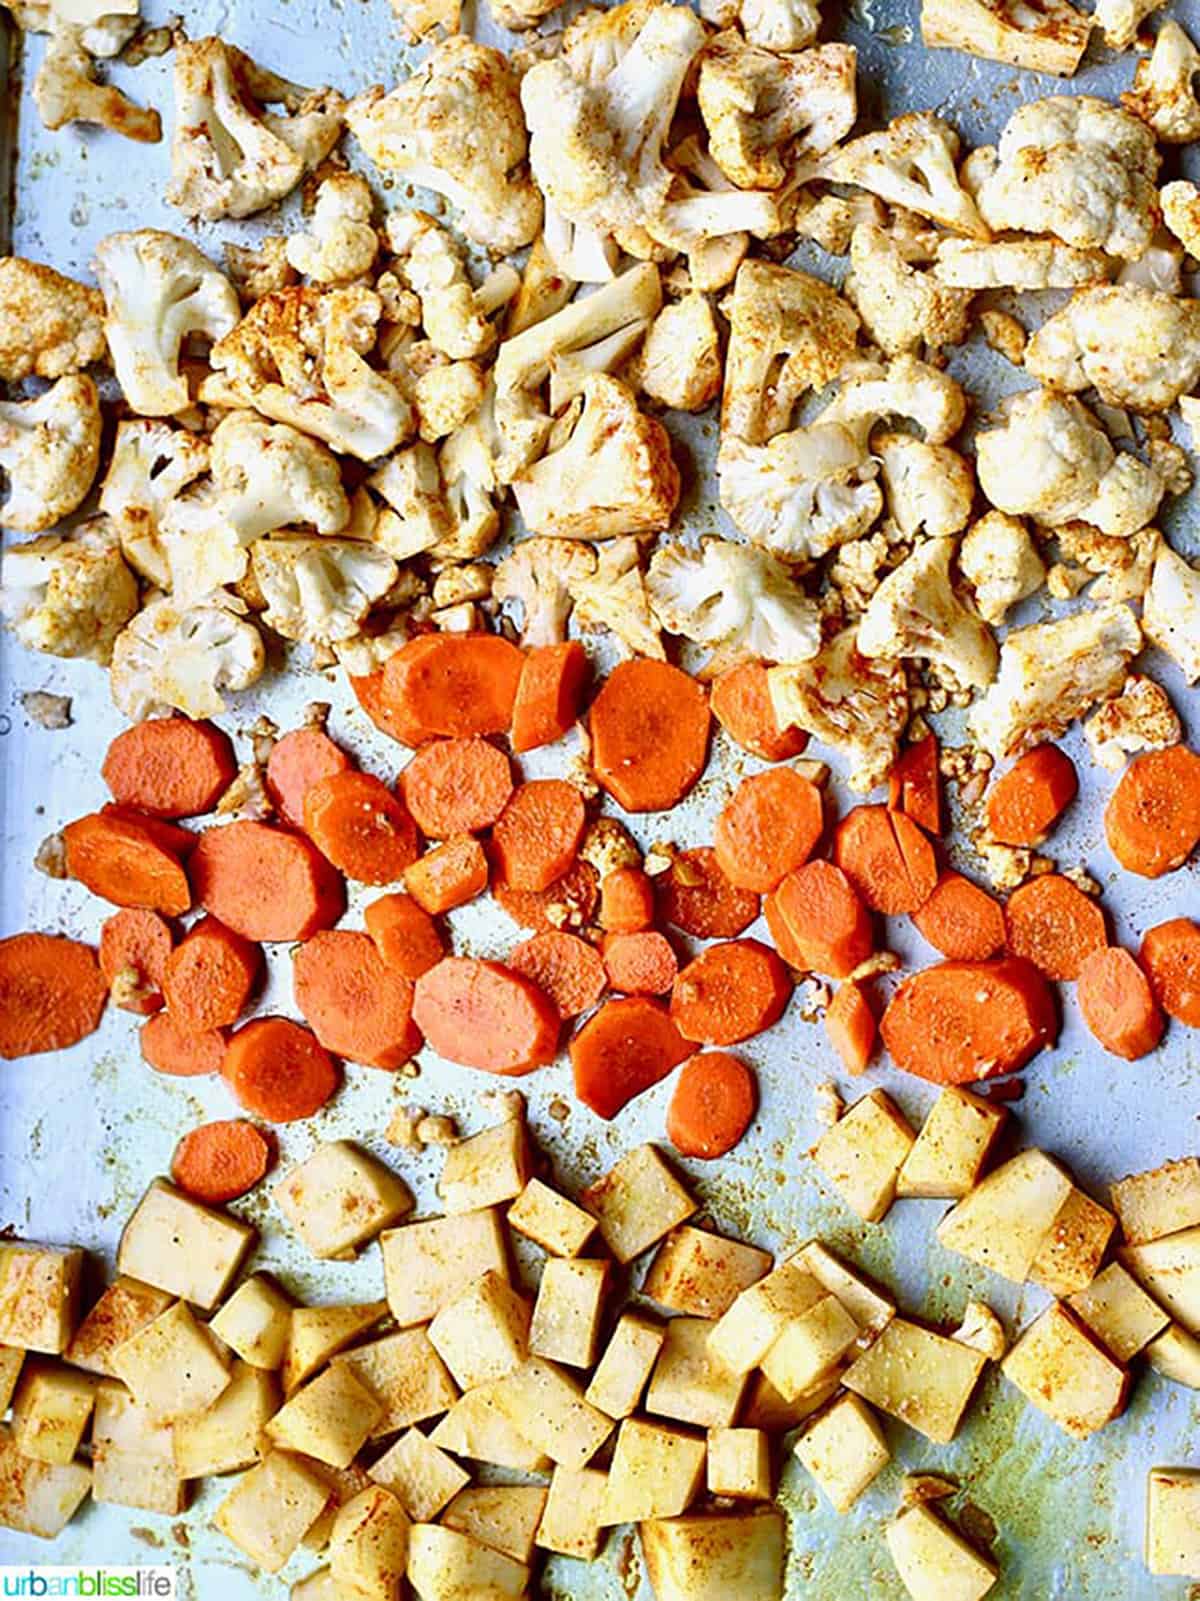 sheet pan filled with chopped and seasoned cauliflower, carrots, potatoes.